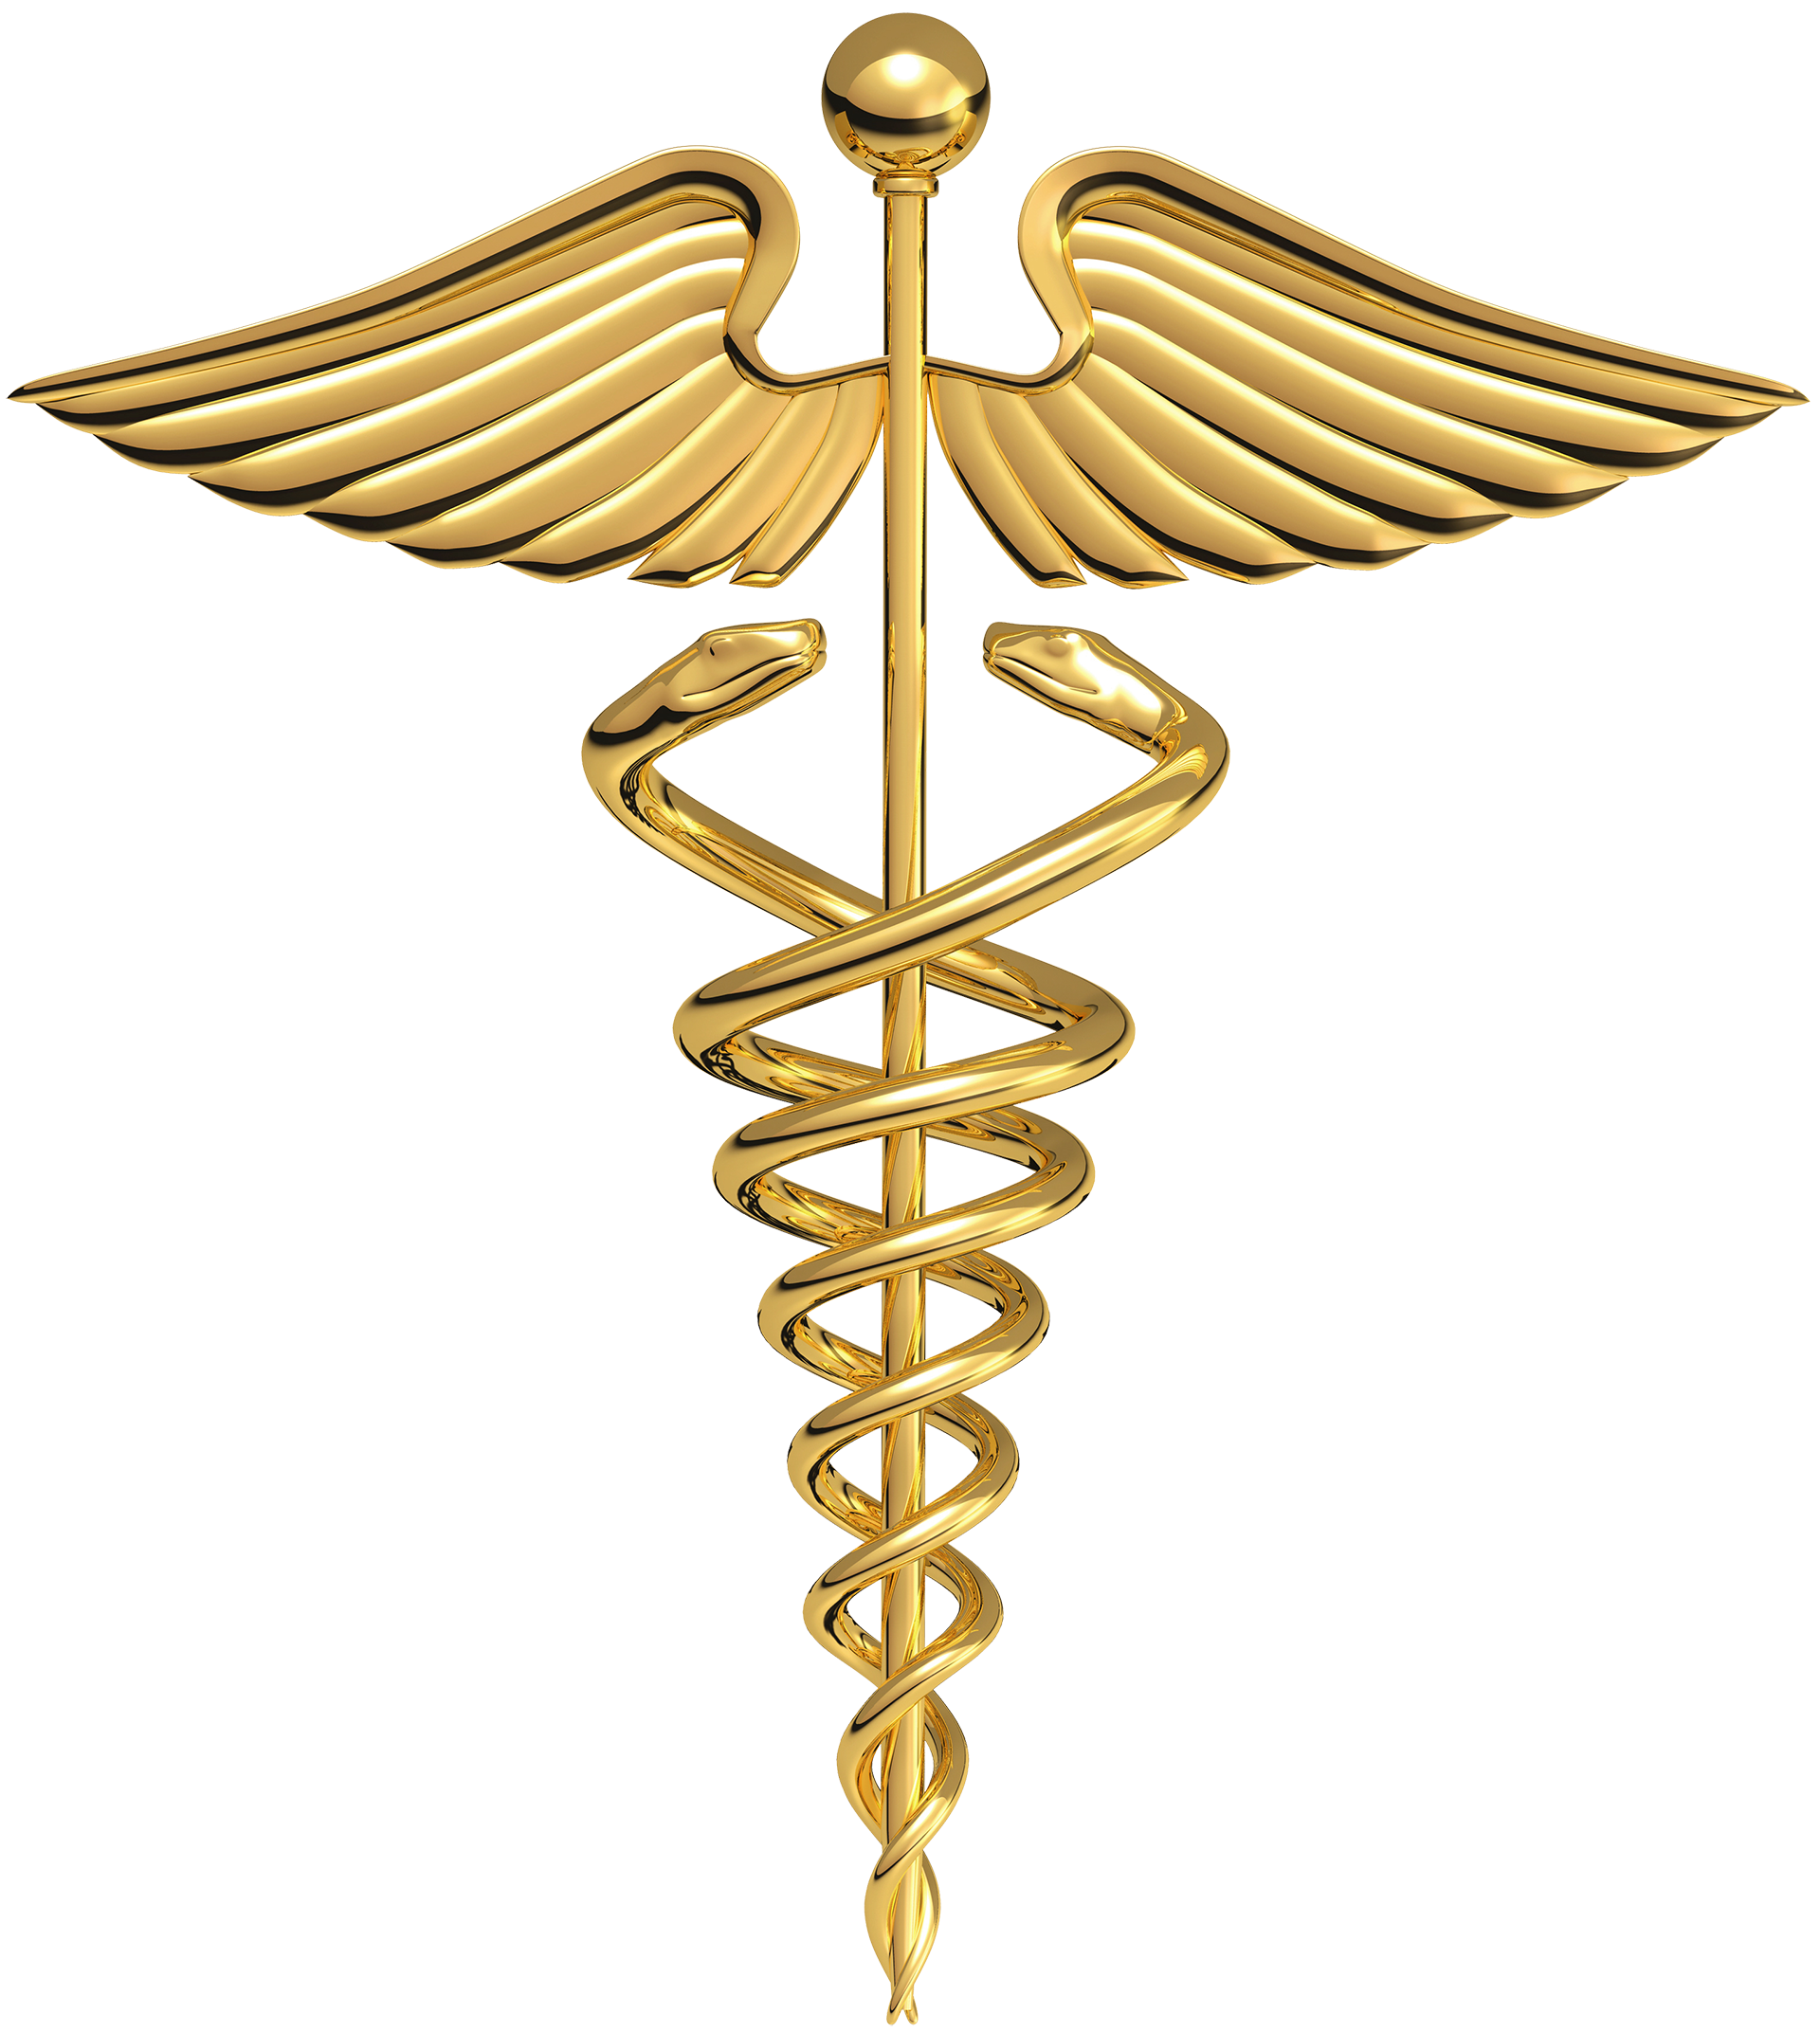 Caduceus - GOOD HEALTH - Messengers of the gods - The gods ARE NEUTRAL, SERIOUS, CRITICAL and GOOD - COMPASSION - MERCY - RESPECT - EMPATHY - BENEVOLENCE - HUMANENESS - GOD'S WILL - Most Compassionate, Most Merciful, Most Respectful, Most Empathetic, Most Benevolent, Most Humane - Maximizing the Good While Eliminating the Bad in the Most Humane Possible Way - BE HUMANE - SEEK THE TRUTH - SEEK JUSTICE - BE KIND - BE GENTLE - BE STRONG - BE GENEROUS - BE HUMBLE - BE THANKFUL - BE GRATEFUL - DO NO HARM - DO NOT HATE - DO NOT FEAR - FEAR NOT - BE NOT AFRAID - CAUSE NO FEAR - DO NOT BE SCARY - CAUSE NO PAIN - BE AS PAINLESS AS POSSIBLE - DO NOT PUNISH - DO NOT MAKE THREATS - DO NOT BE COERCIVE - BE PERMISSIVE - BE TOLERANT - USE BIRTH CONTROL - PERMIT DIVORCE - EMPATHY IS CRITICAL - RESPECT FOR THE DIGNITY OF ALL HUMAN BEINGS IS CRITICAL - FREE UNIVERSAL HEALTH CARE WITH ANY DOCTOR ANYWHERE - FREE UNIVERSAL EDUCATION ANYWHERE - UNIVERSAL HOME OWNERSHIP EVERYWHERE